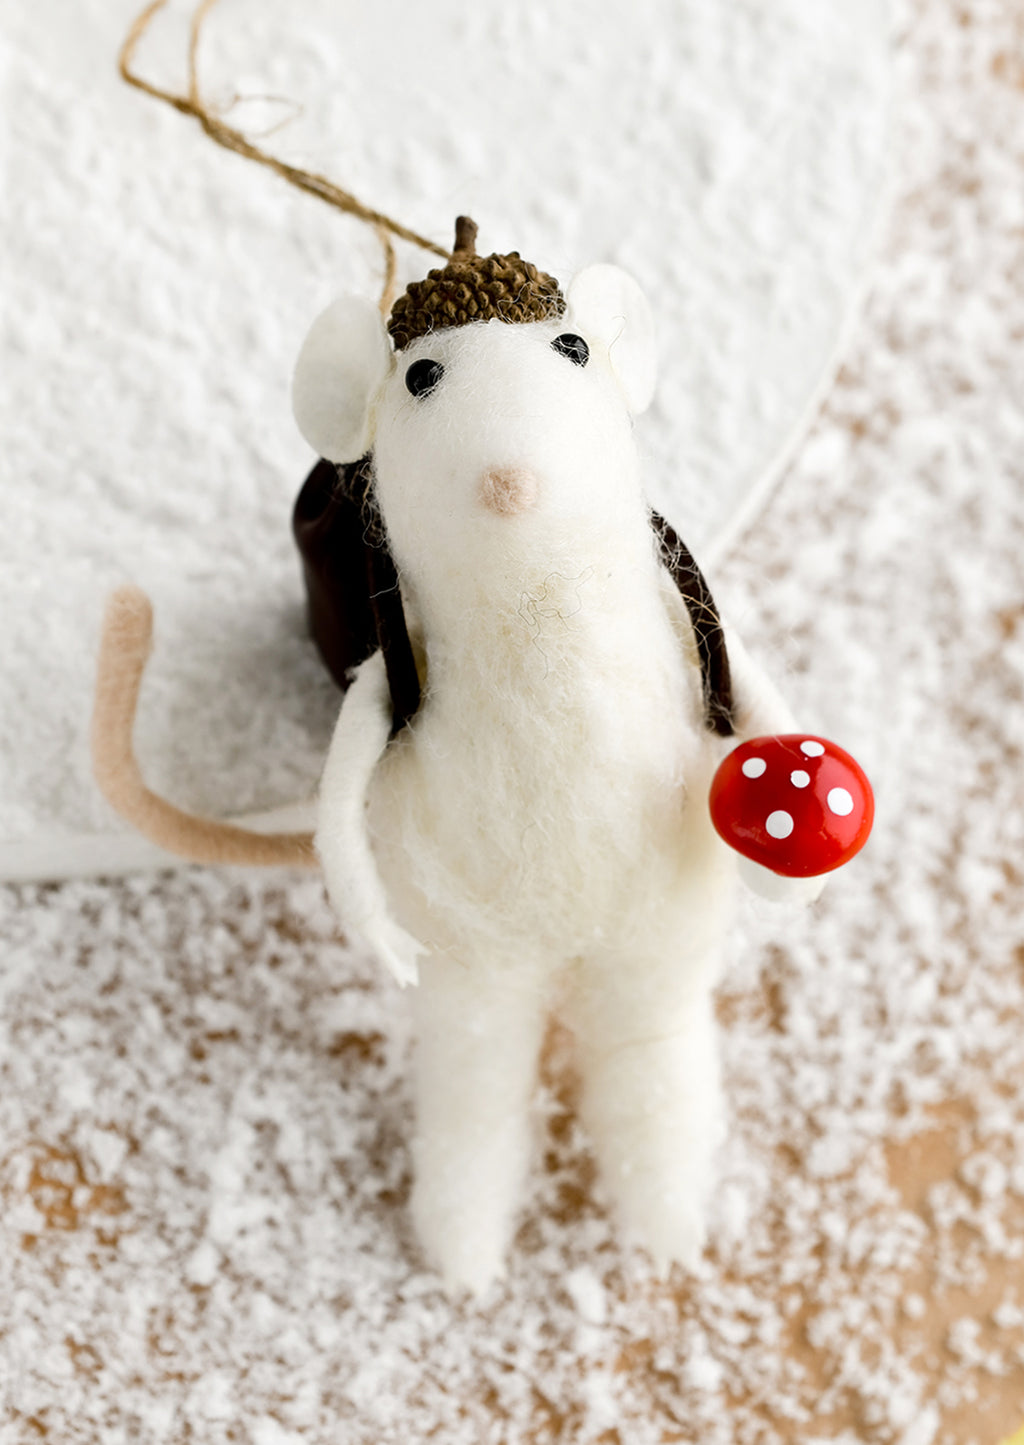 1: A felted holiday ornament of a mouse holding a mushroom.